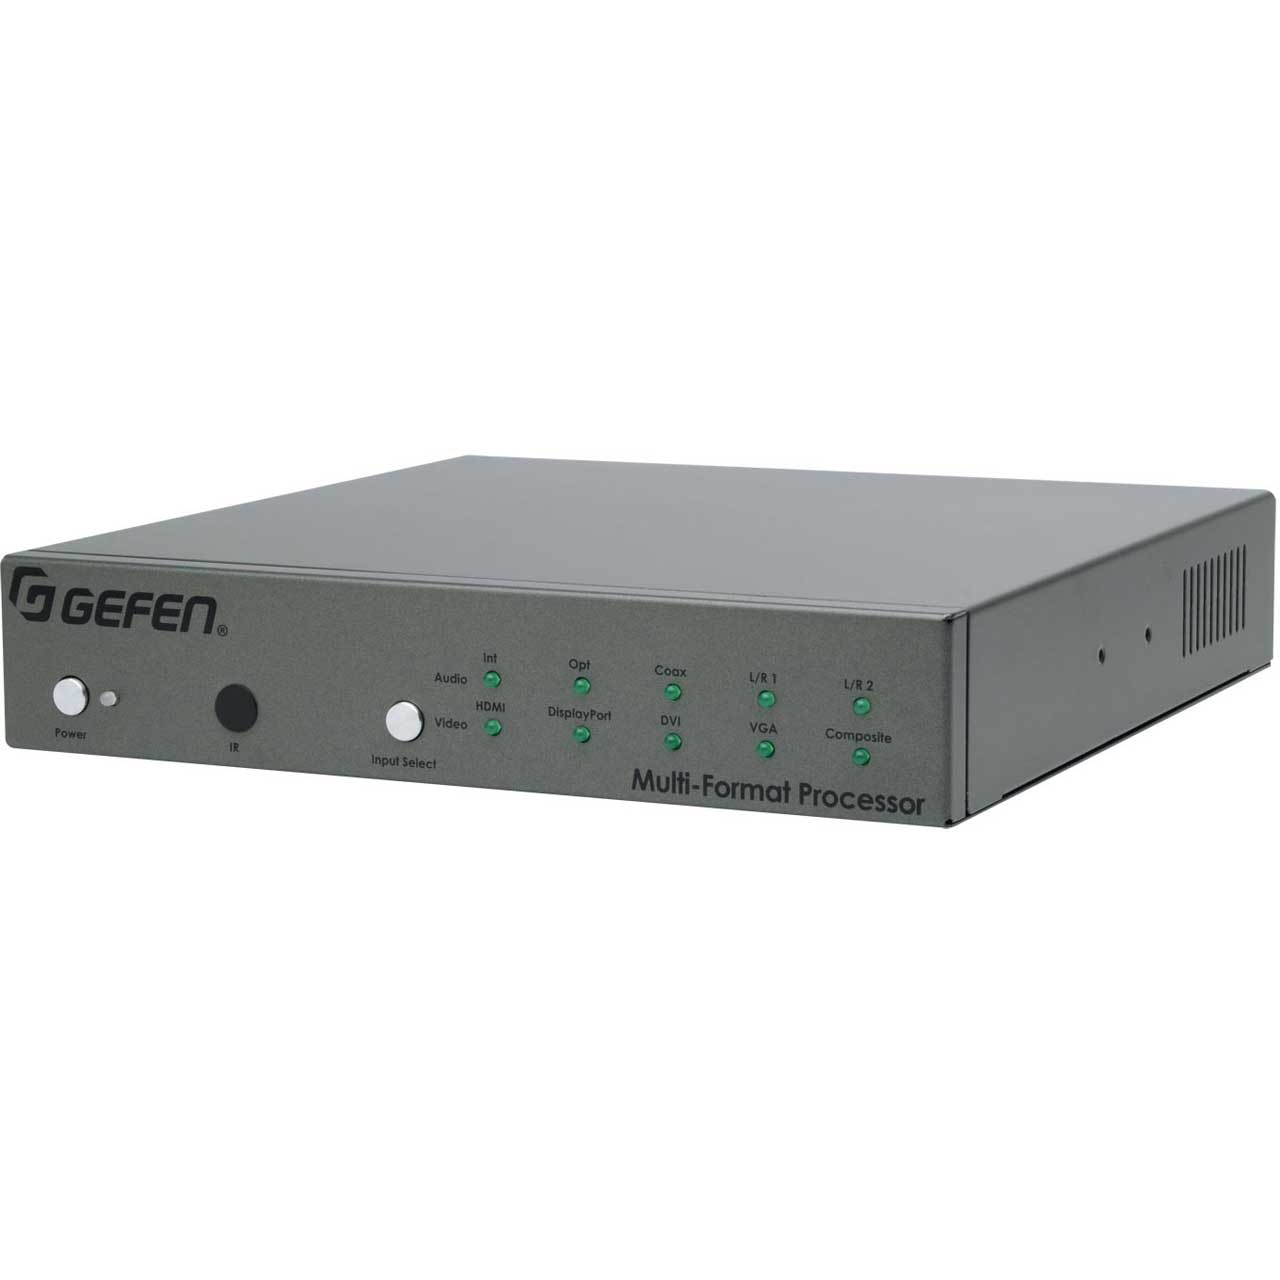 Roland Pro AV VP-42H Video Processor - up to Four HDMI Video Sources on a  Single Output